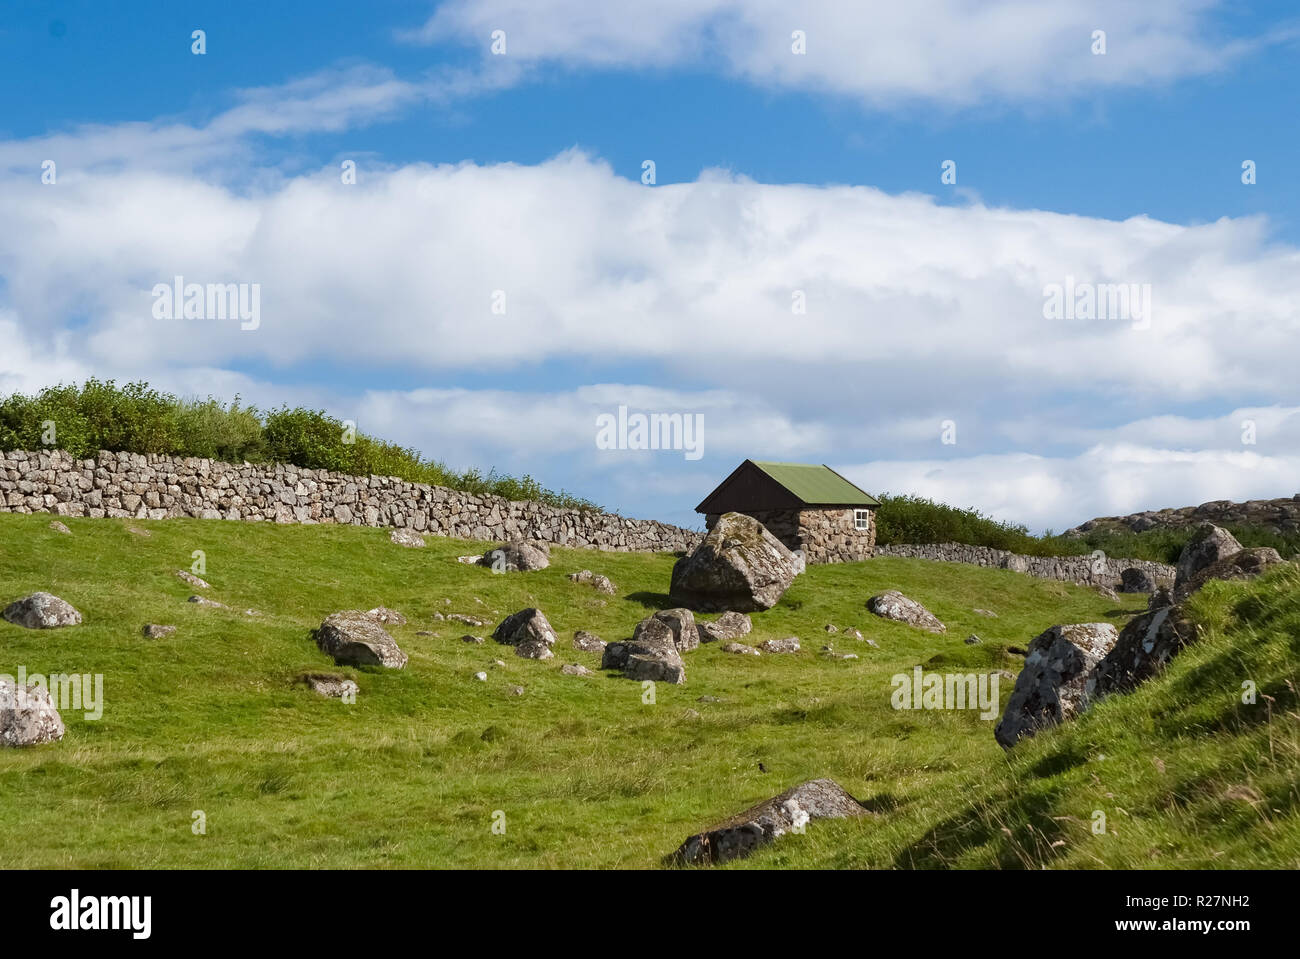 indbildskhed Memo Faldgruber Farmhouse in Torshavn, Denmark. Old stone house in farm yard on cloudy blue  sky. Typical rural architecture. Nature and environment. Beautiful  landscape view. Summer vacation in country Stock Photo - Alamy